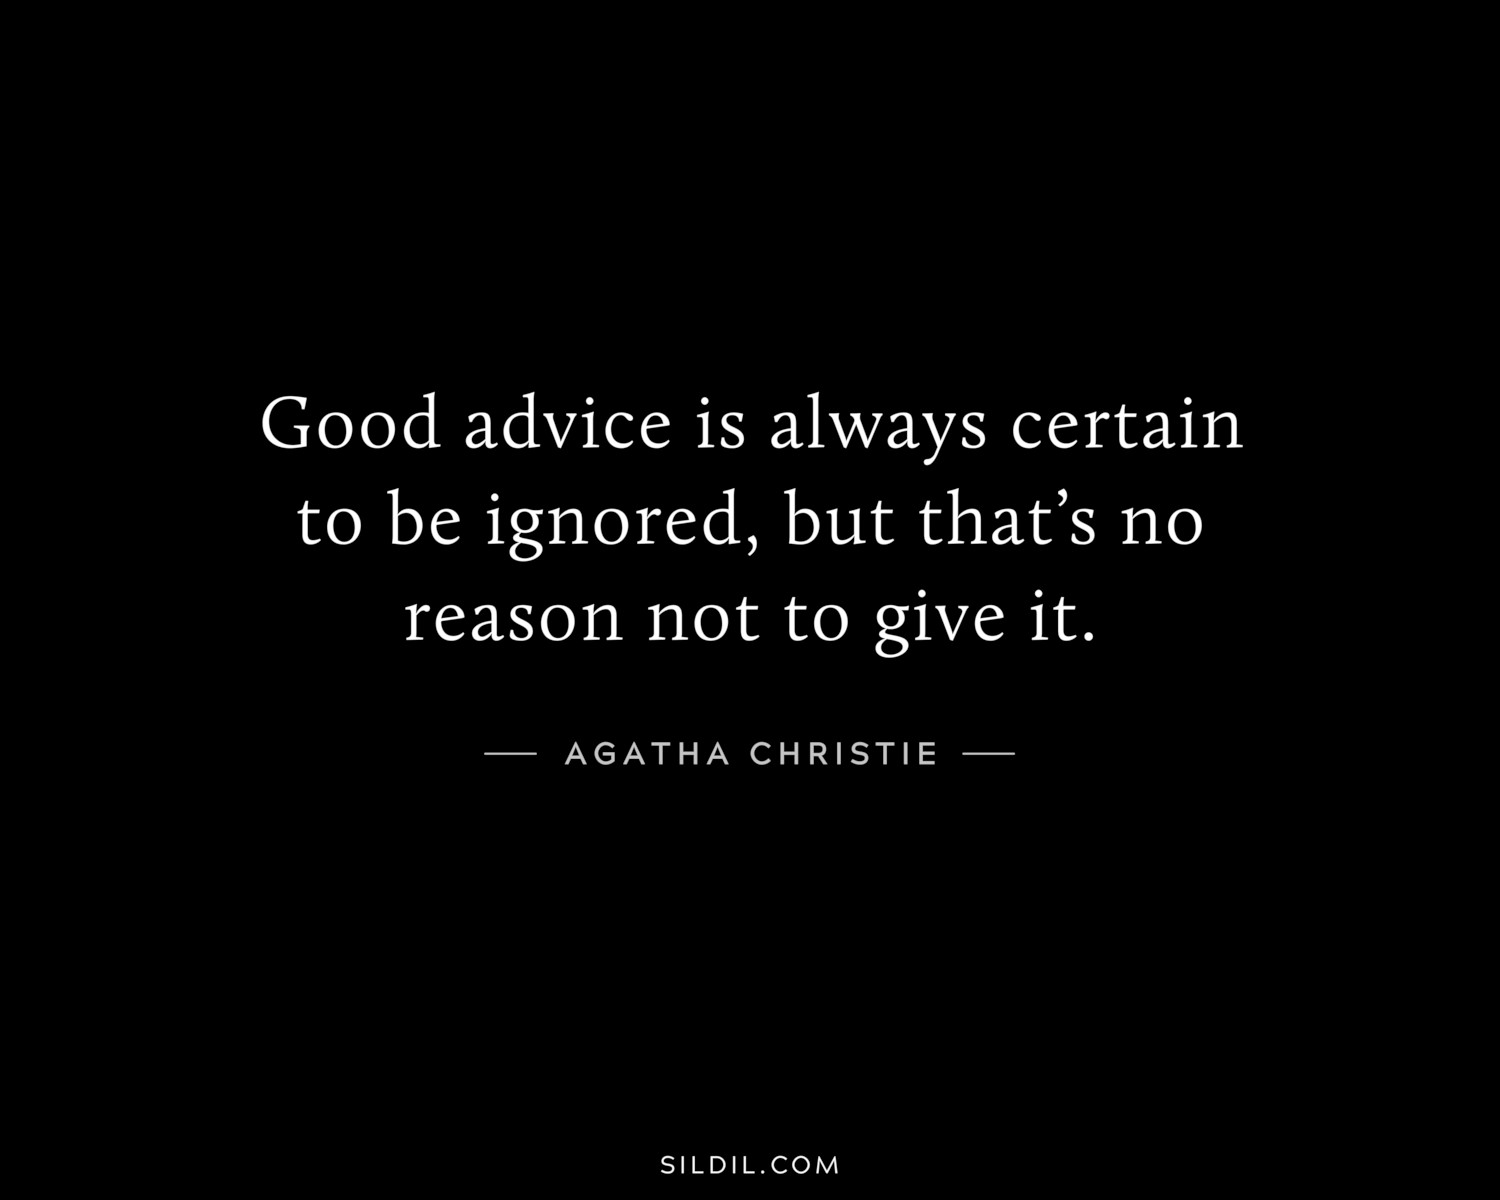 Good advice is always certain to be ignored, but that’s no reason not to give it.